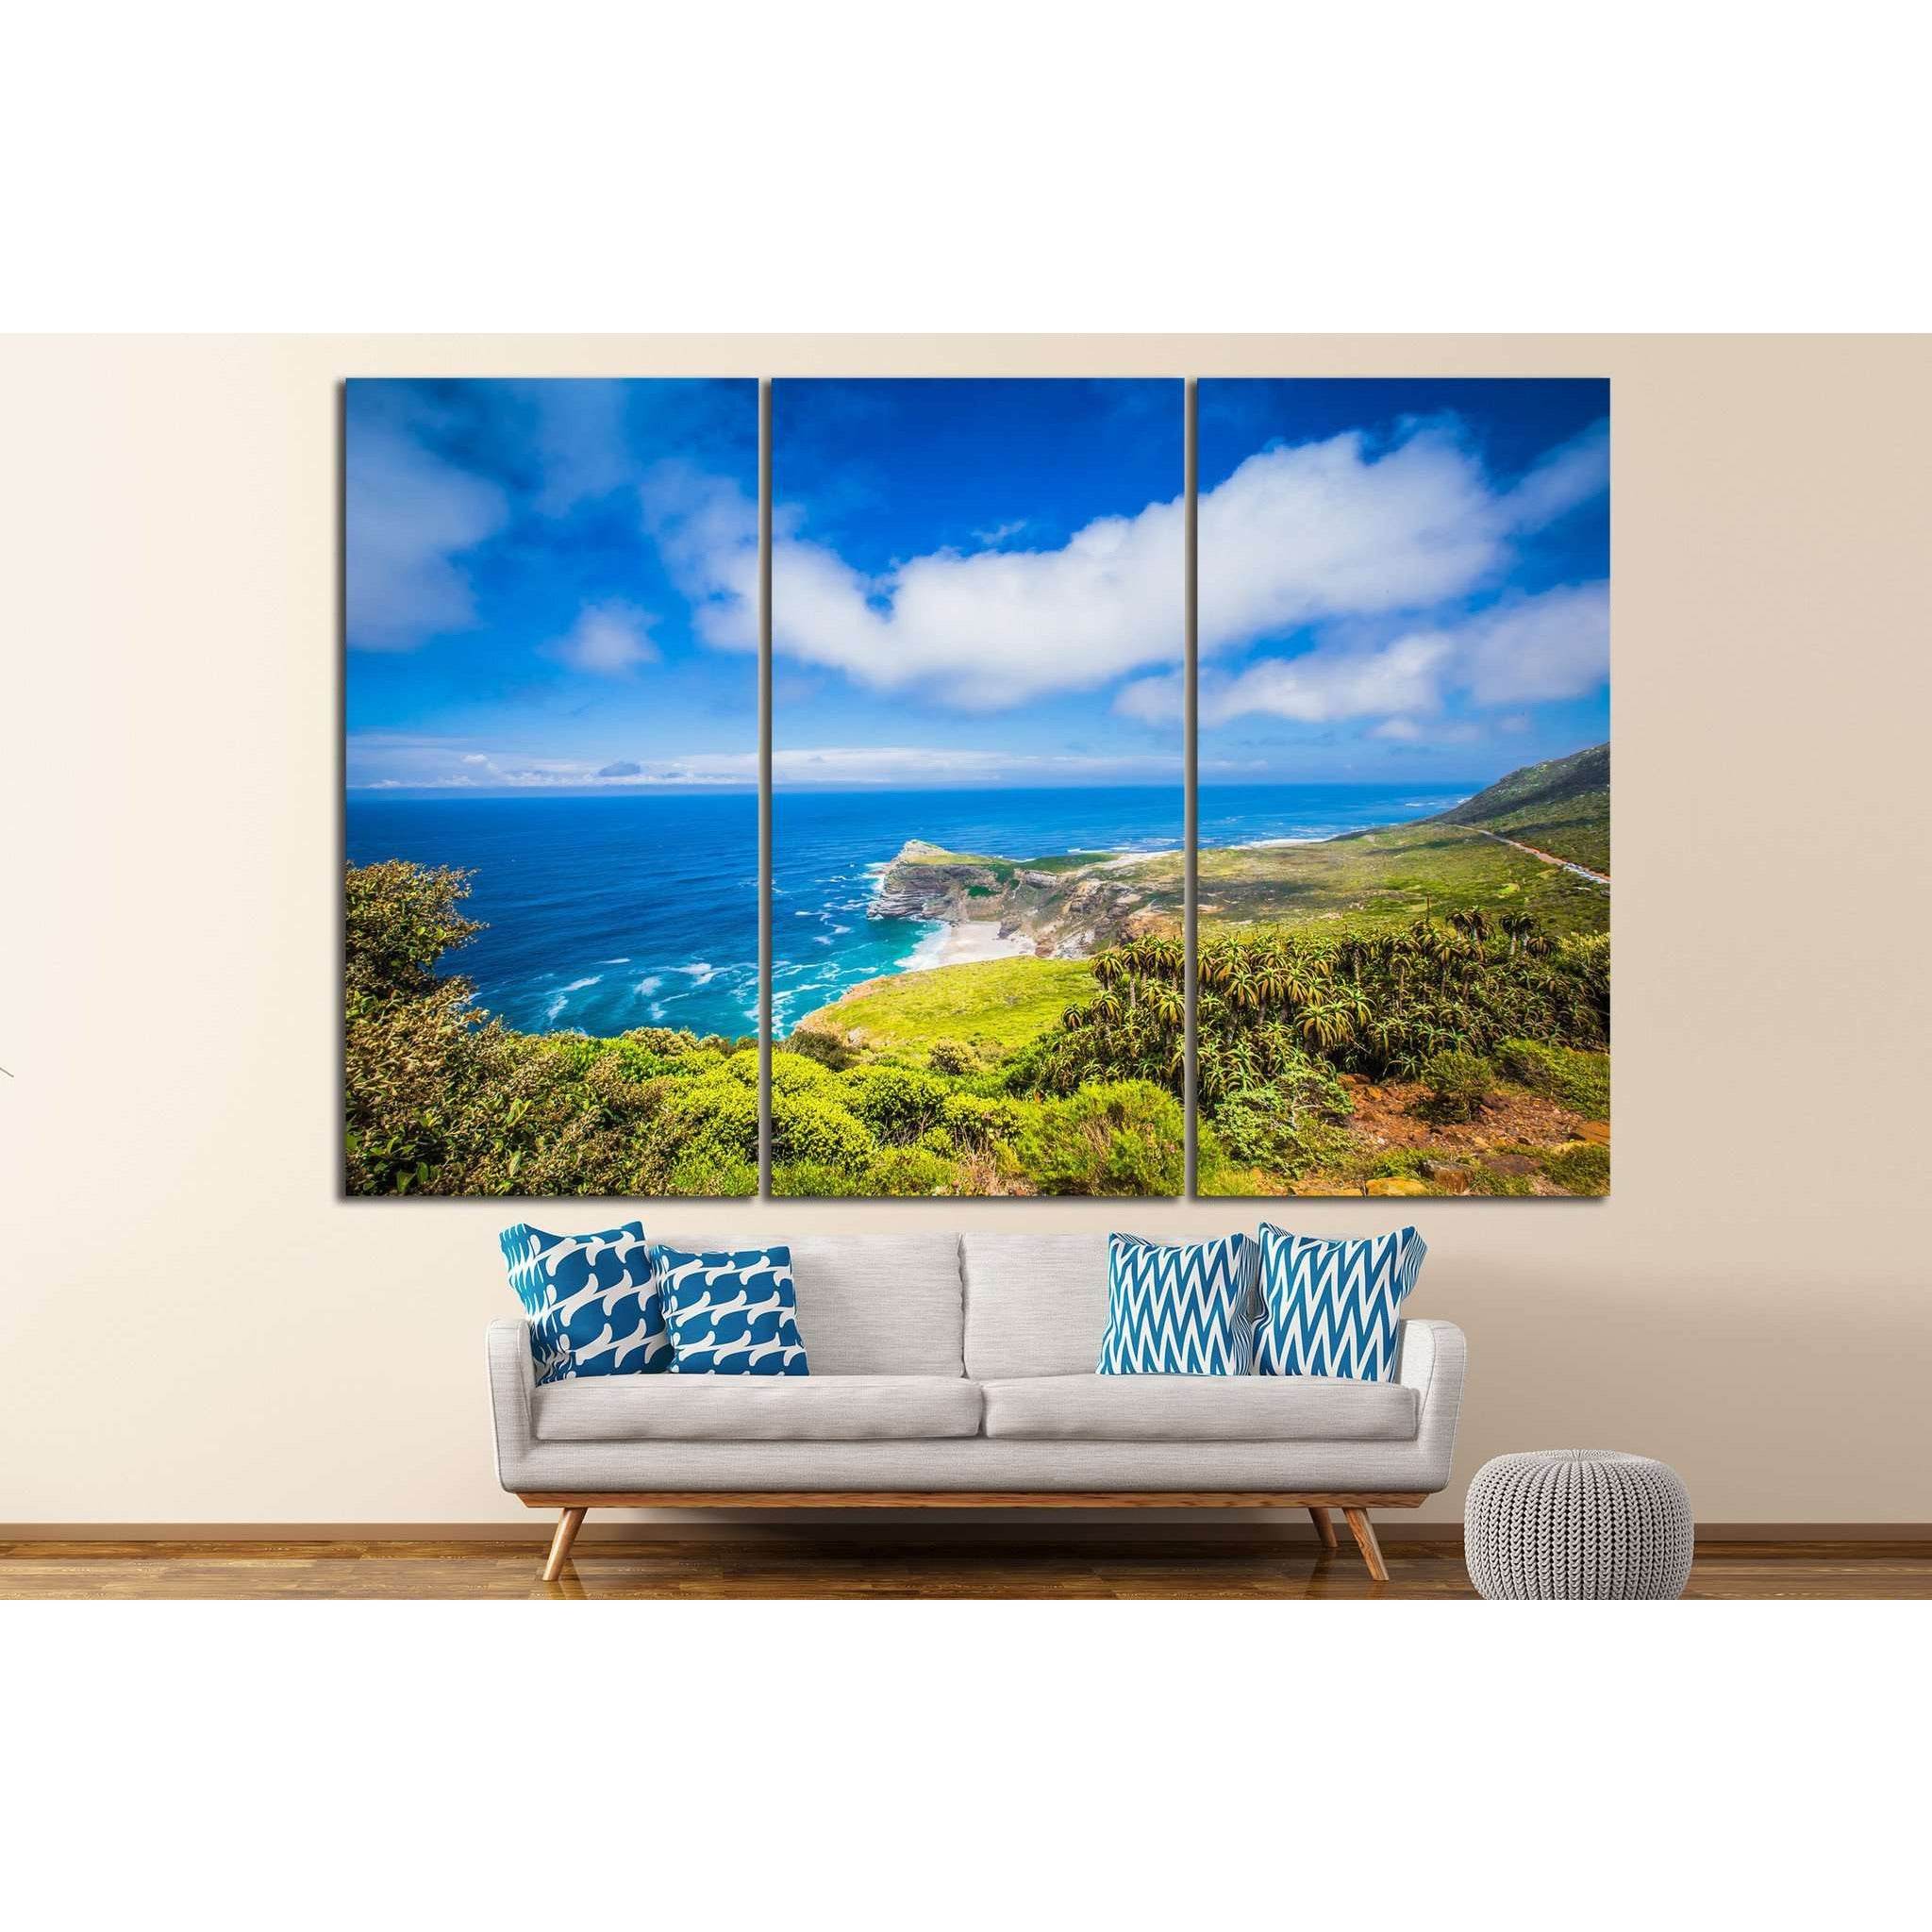 Cape Point , South Africa №627 Ready to Hang Canvas Print